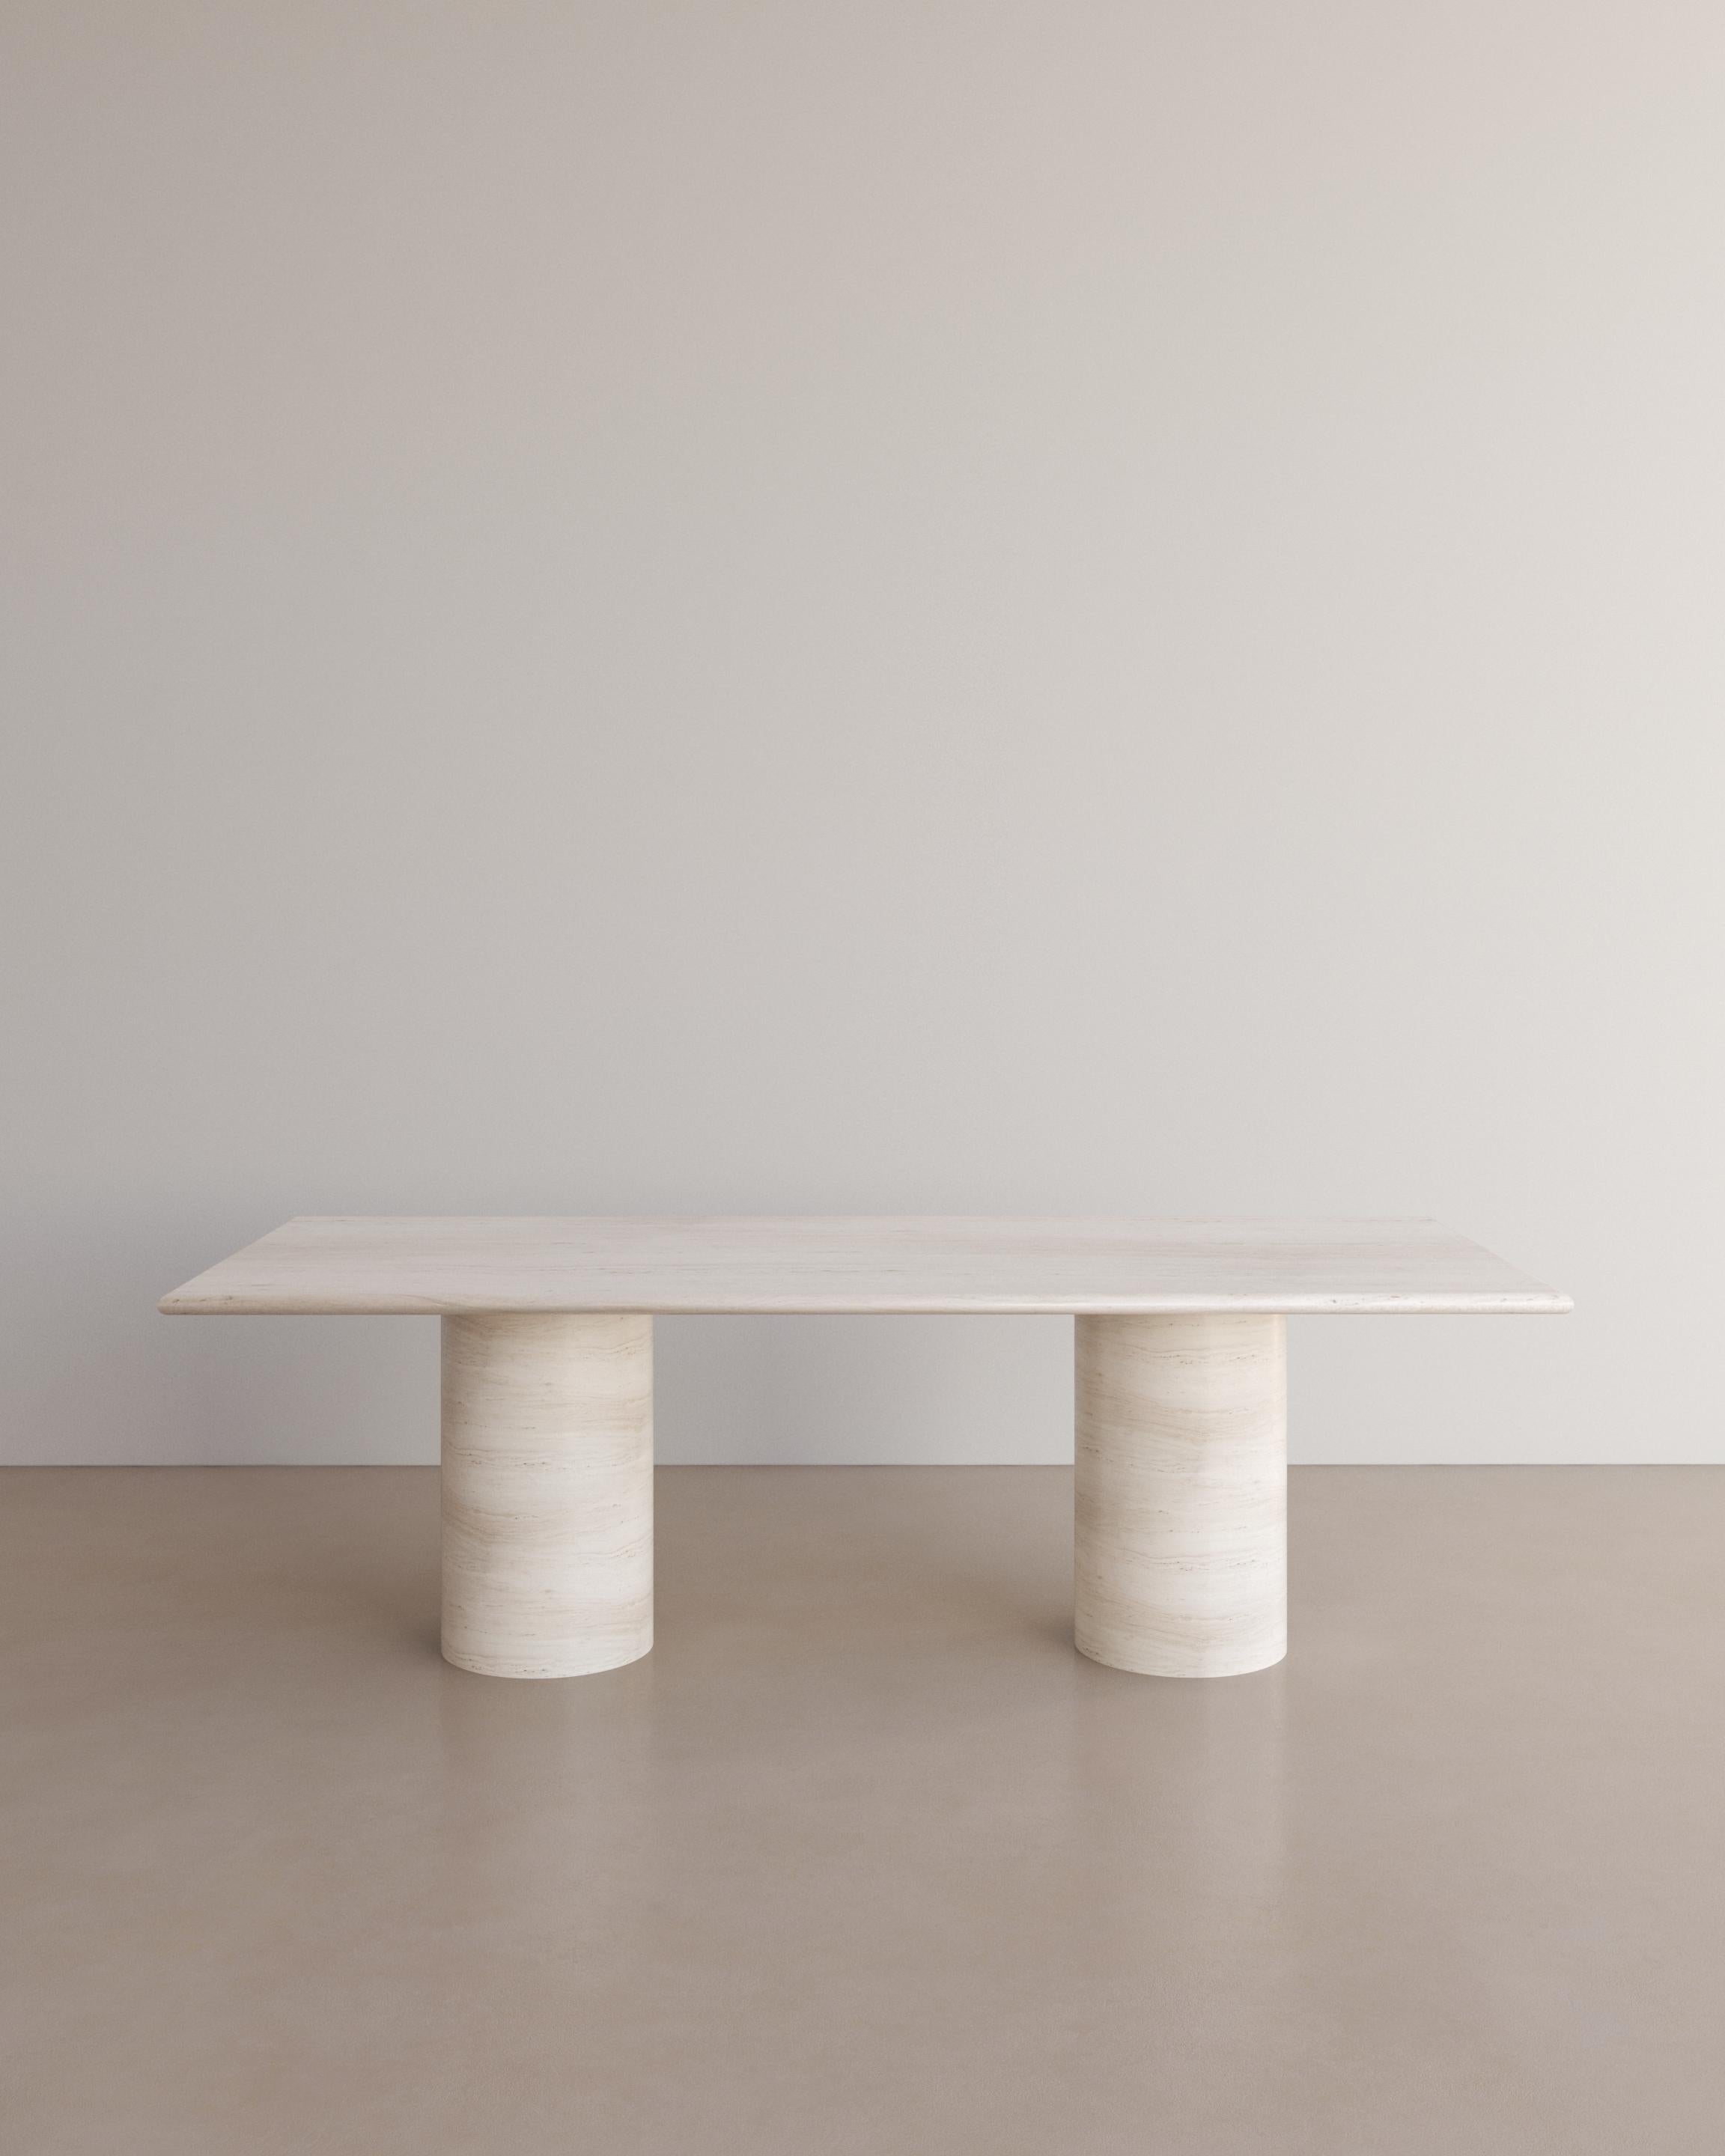 The Voyage dining table I in Bianco Travertine by The Essentialist celebrates the simple pleasures that define life and replenish the soul through harnessing essential form. Envisioned as an ode to historical elegance, captured through a modern lens